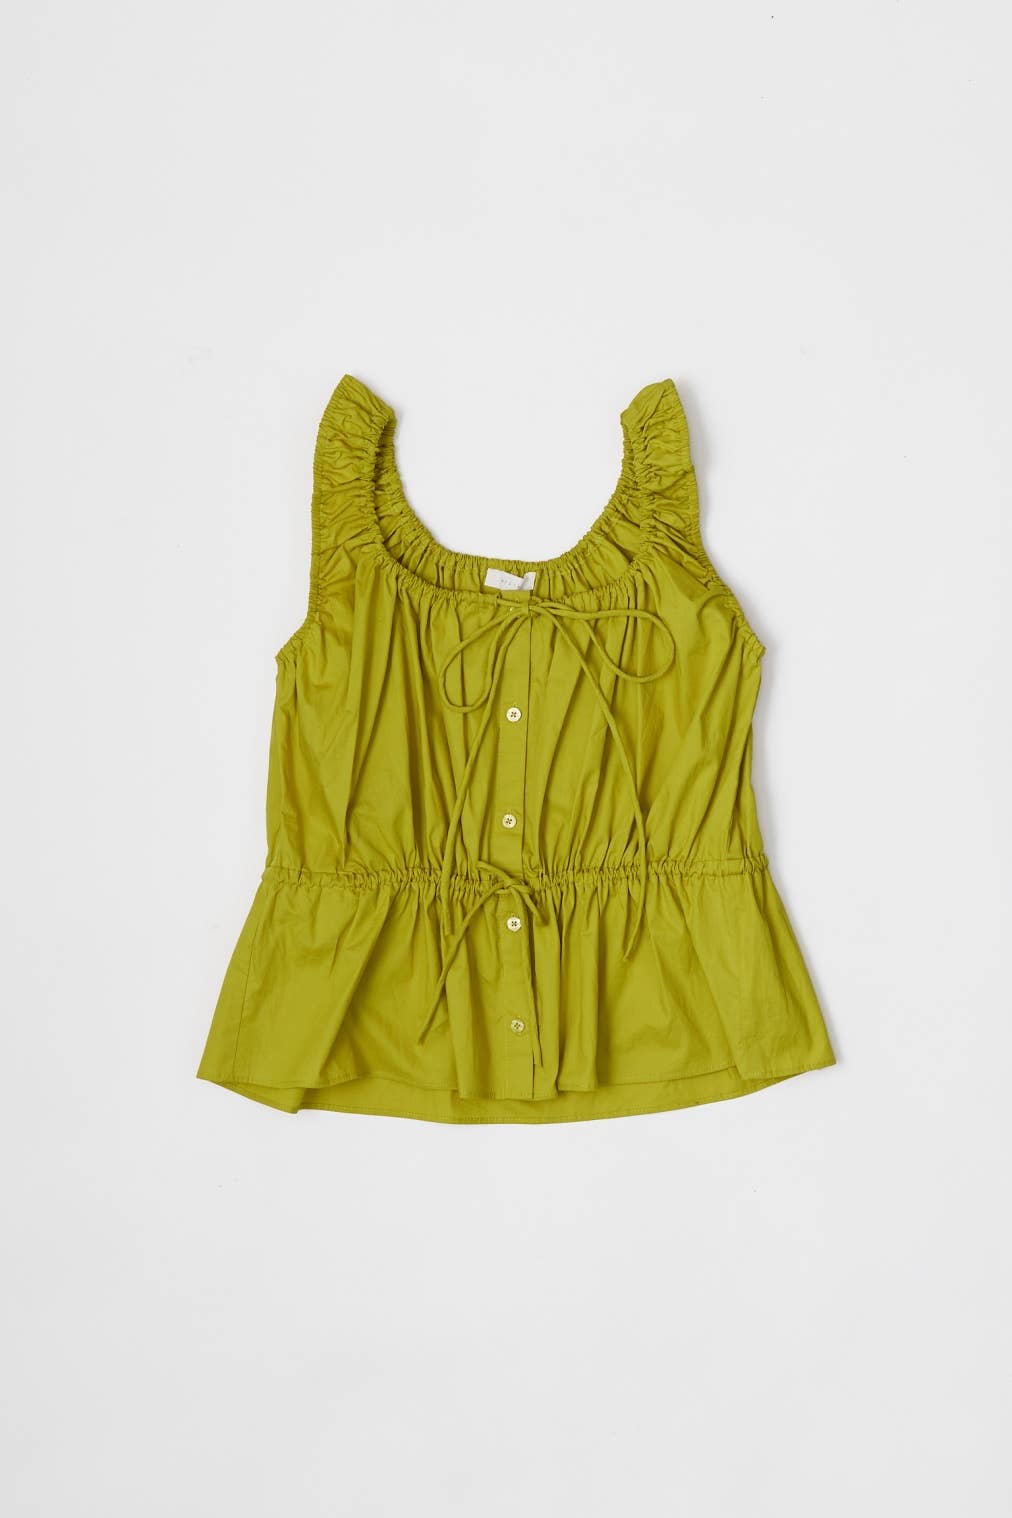 The Darla Top - Gathered Poplin Lime Colored Crop Top Tops